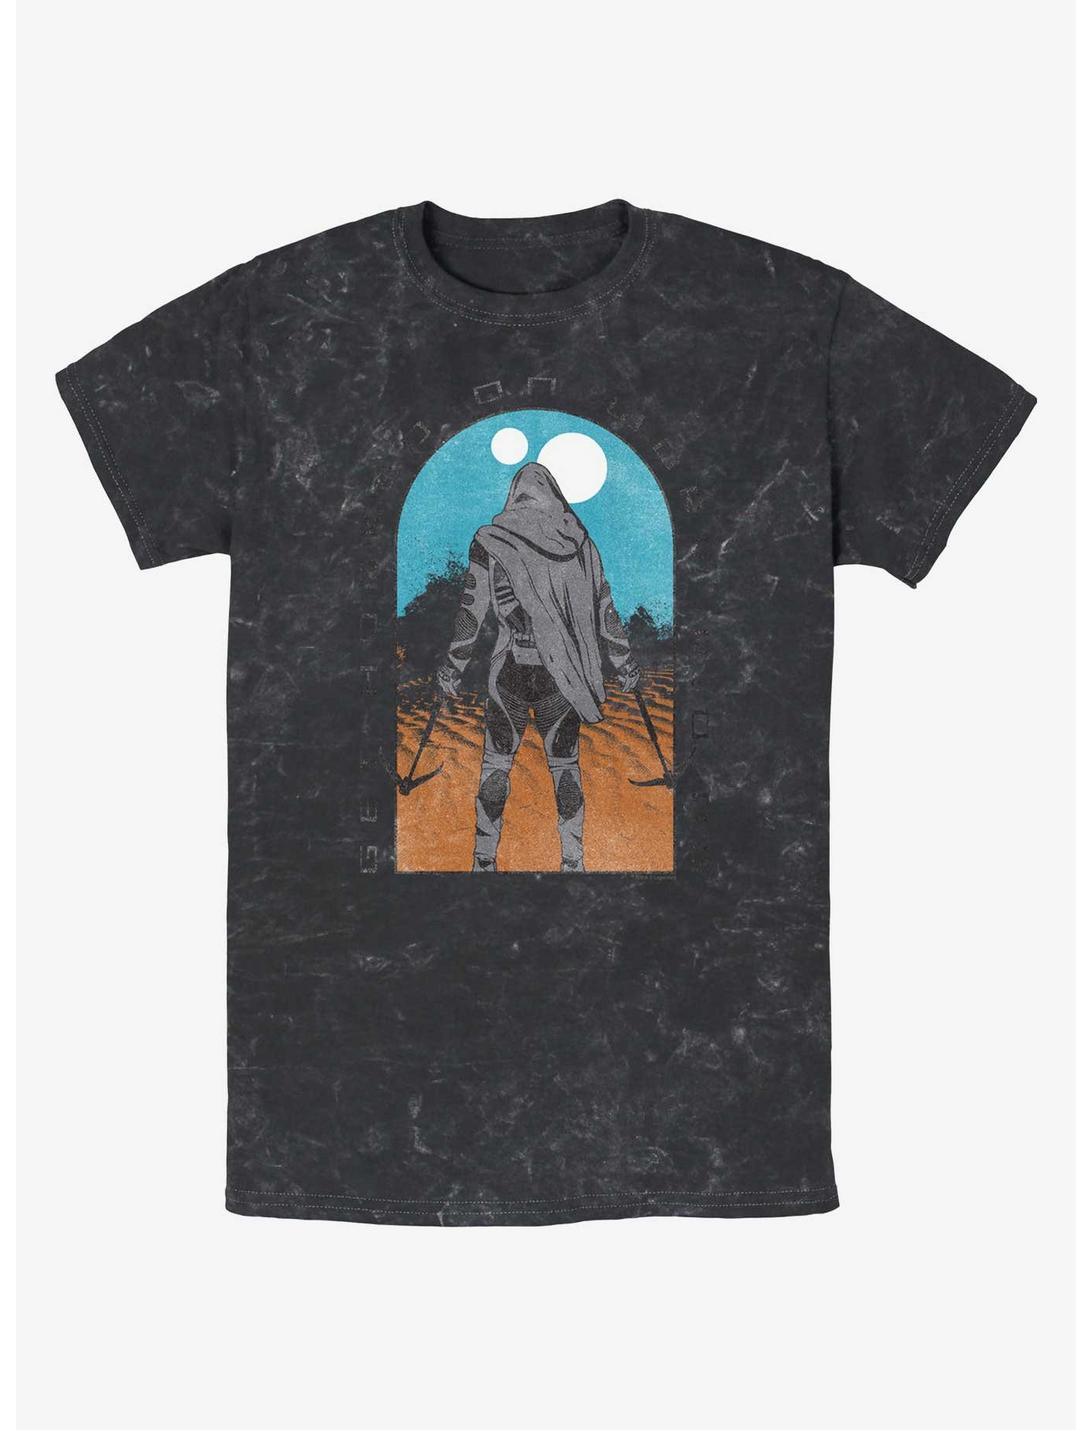 Dune: Part Two Desert Rider Tombstone Mineral Wash T-Shirt, BLACK, hi-res